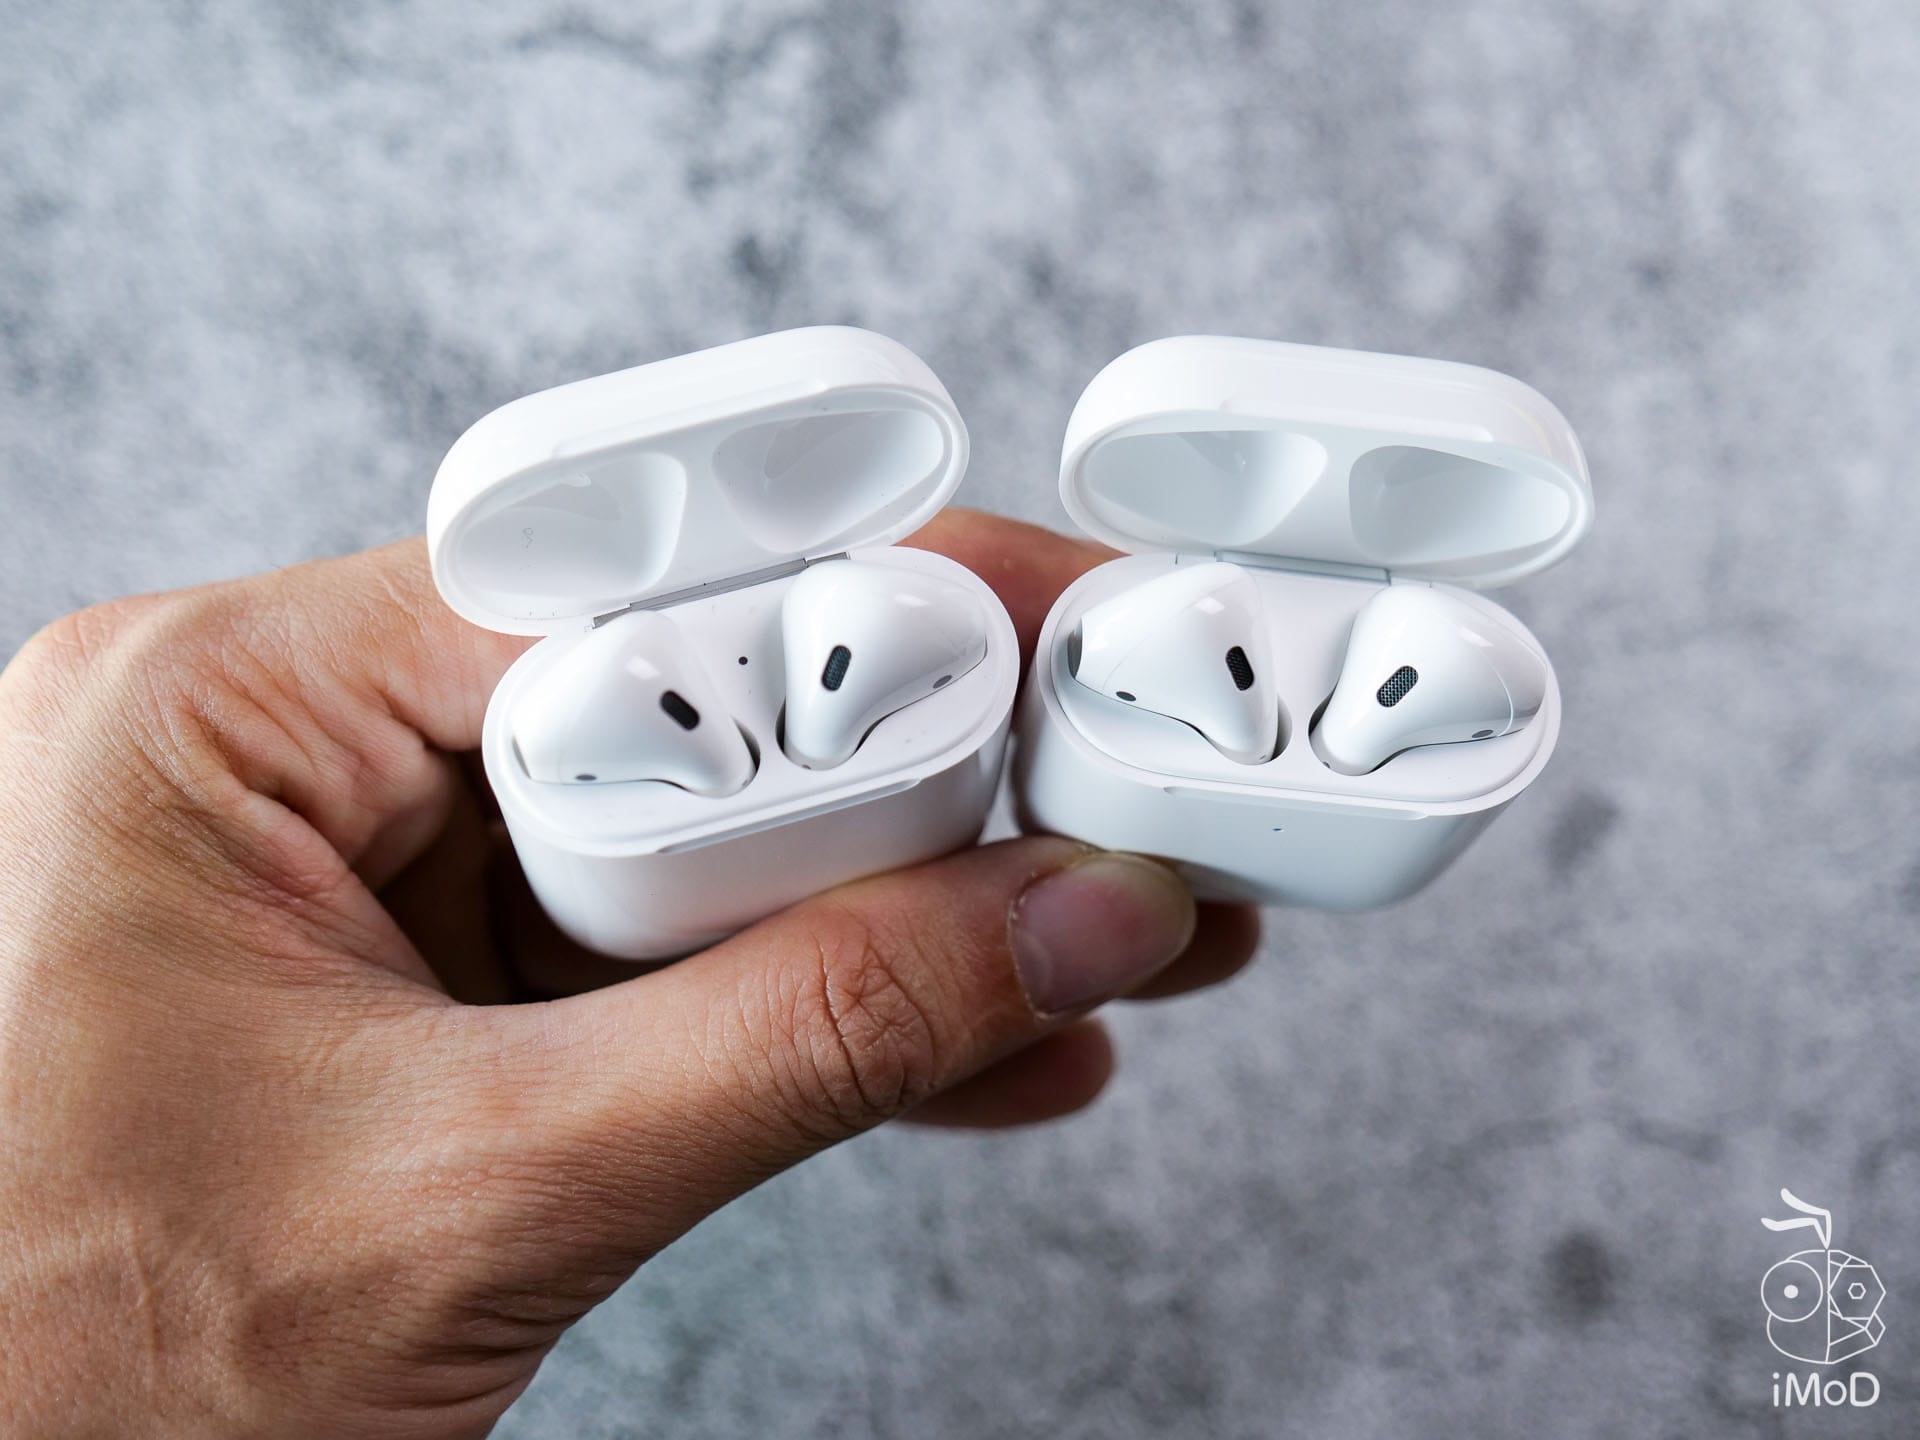 Airpods pro huilian. Apple AIRPODS Pro 2022. Аирподс про 2022. AIRPODS Pro и AIRPODS 2. Наушники Apple аирподс про 2.